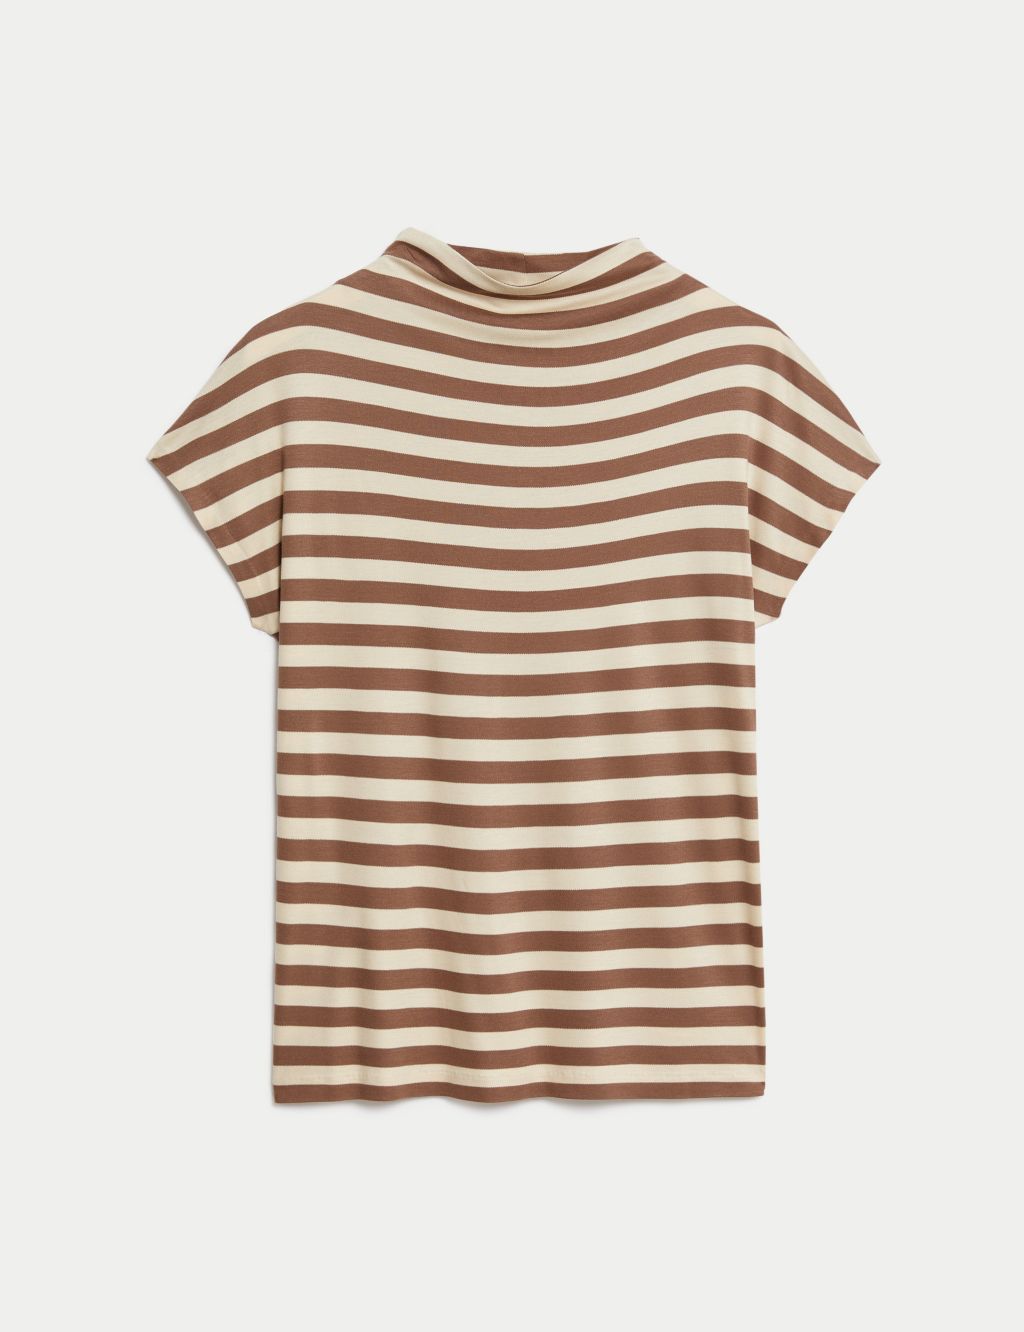 Jersey Striped Top image 2